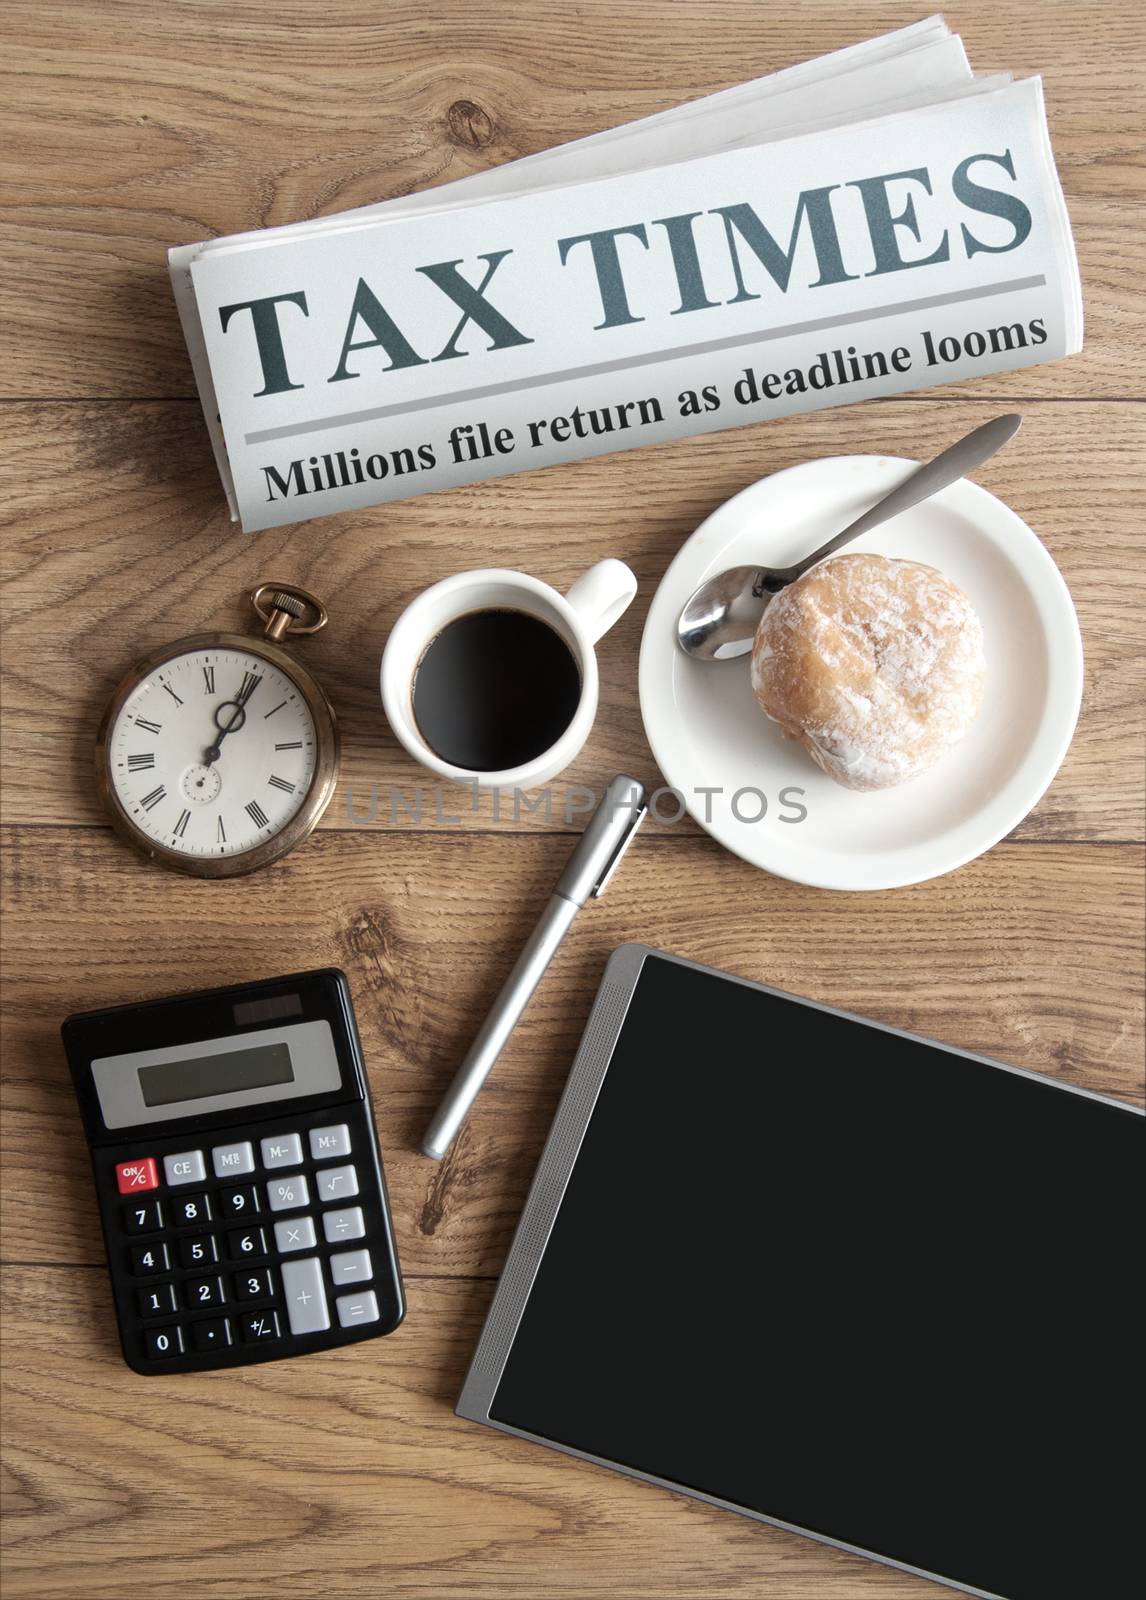 Tax times mock up newspaper with clock, calculator and tablet